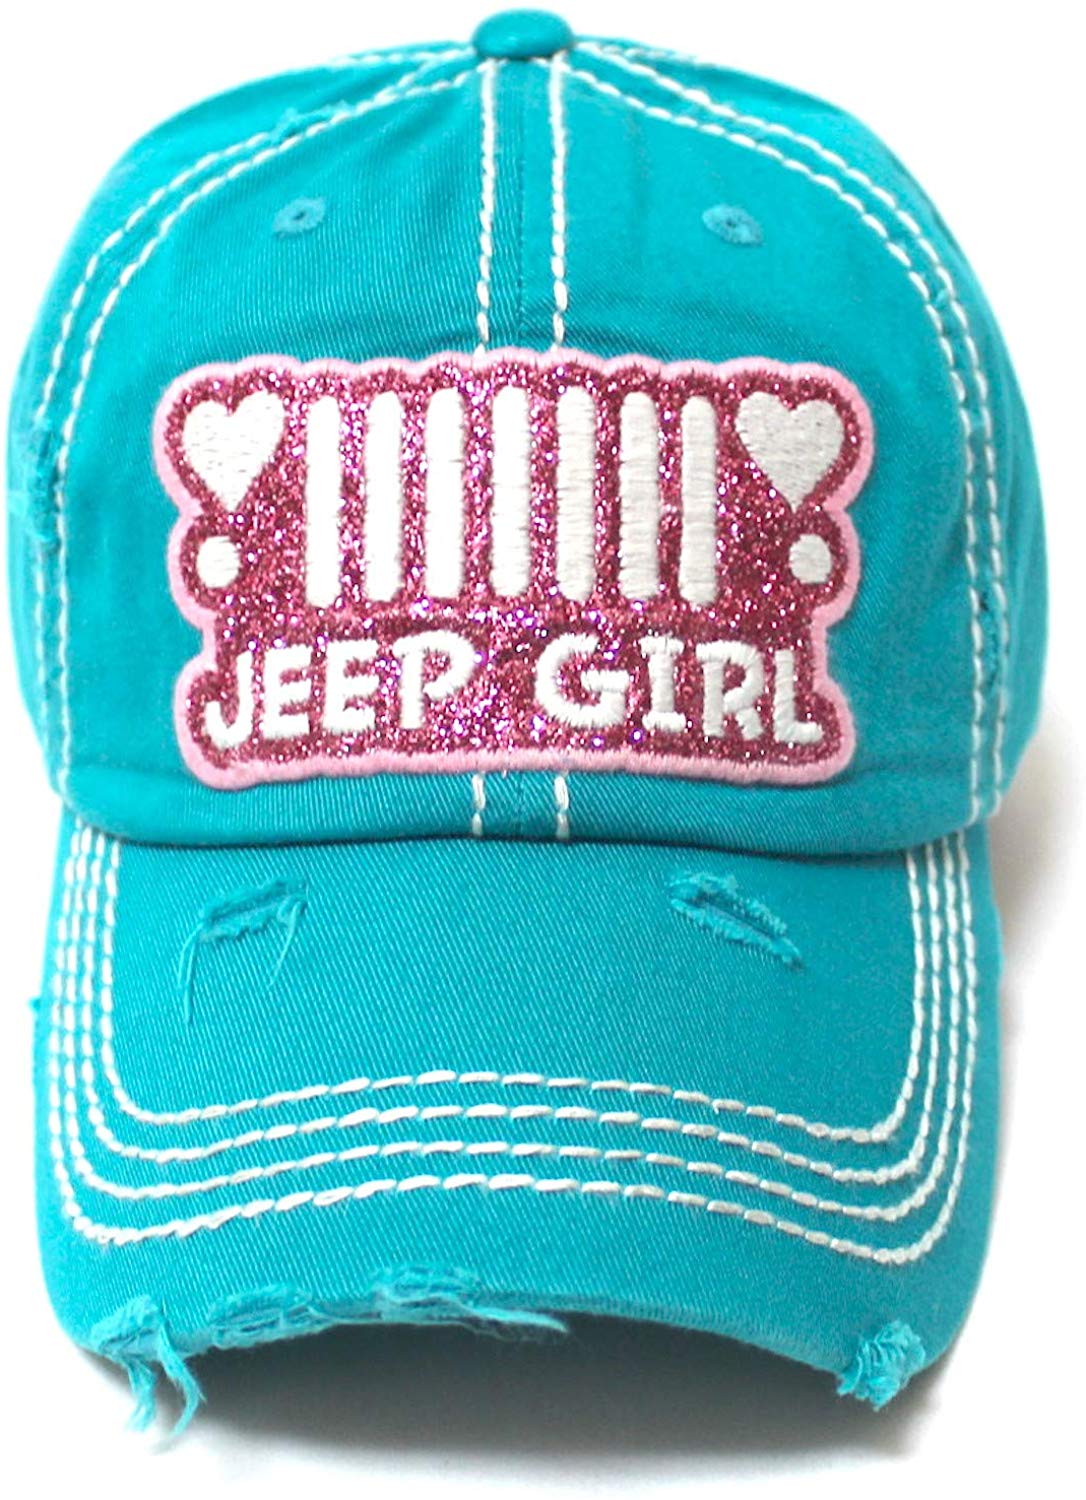 Women's Ballcap Jeep Girl Pink Glitter, Hearts Patch Embroidery Hat, Jewel Turquoise - Caps 'N Vintage 